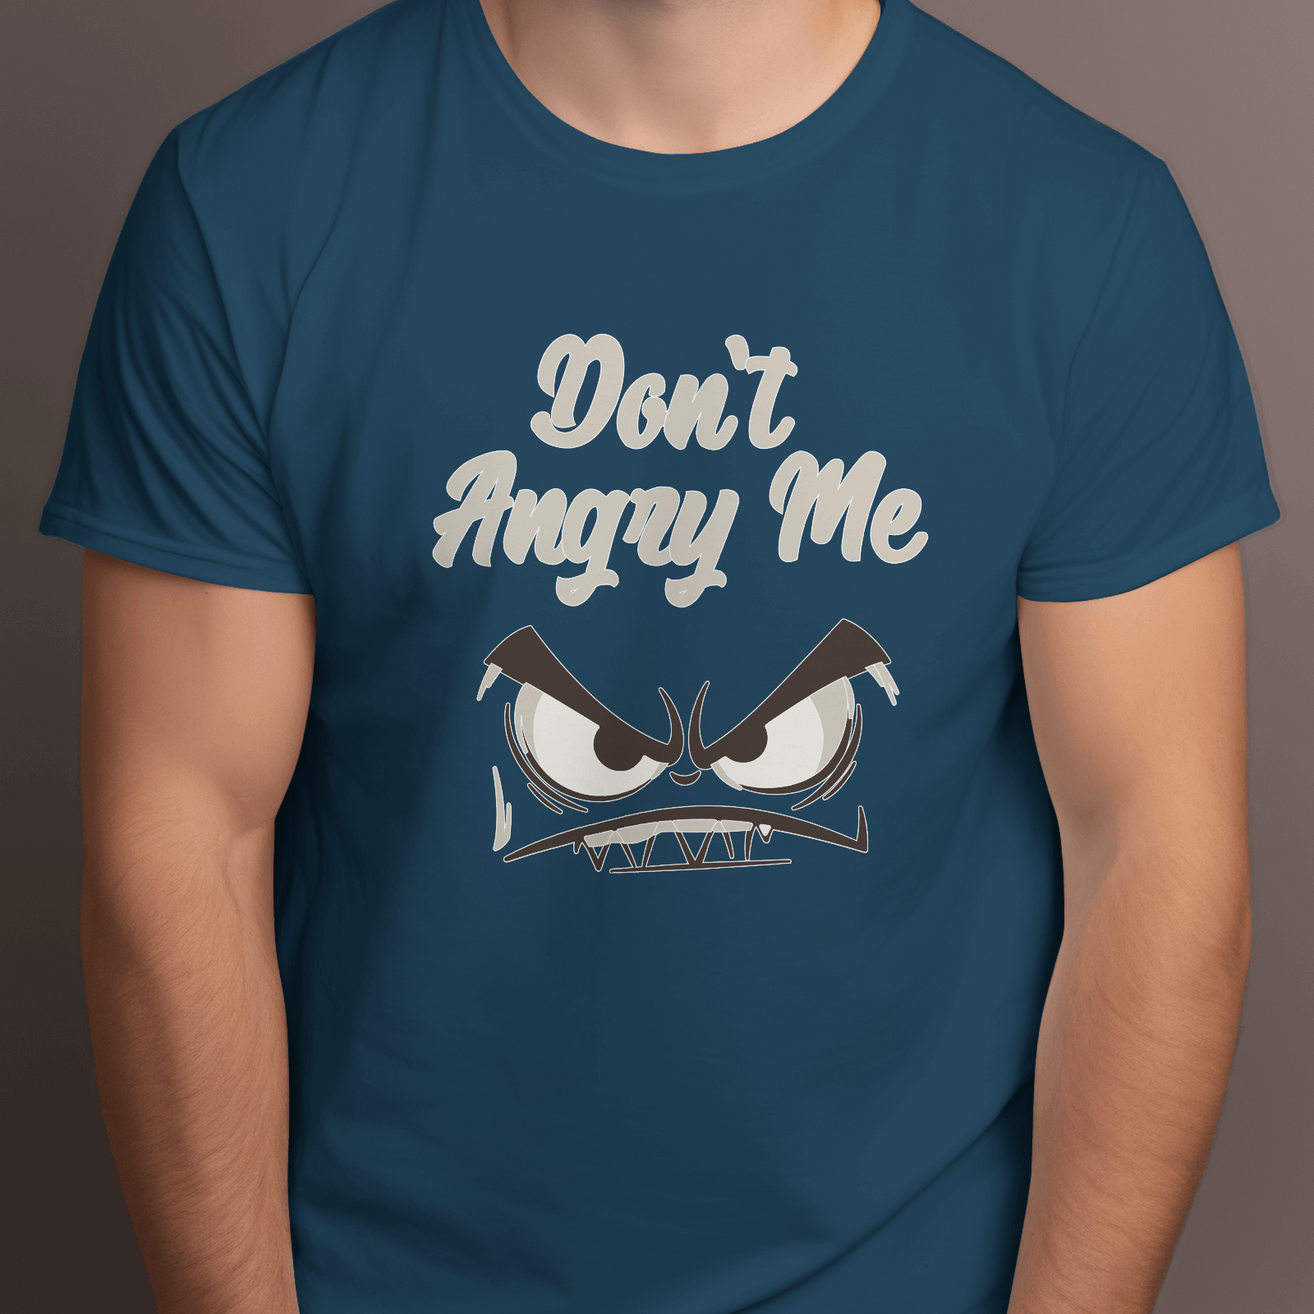 Men's 'Don't Angry Me' T-Shirt - Humorous Statement Tee